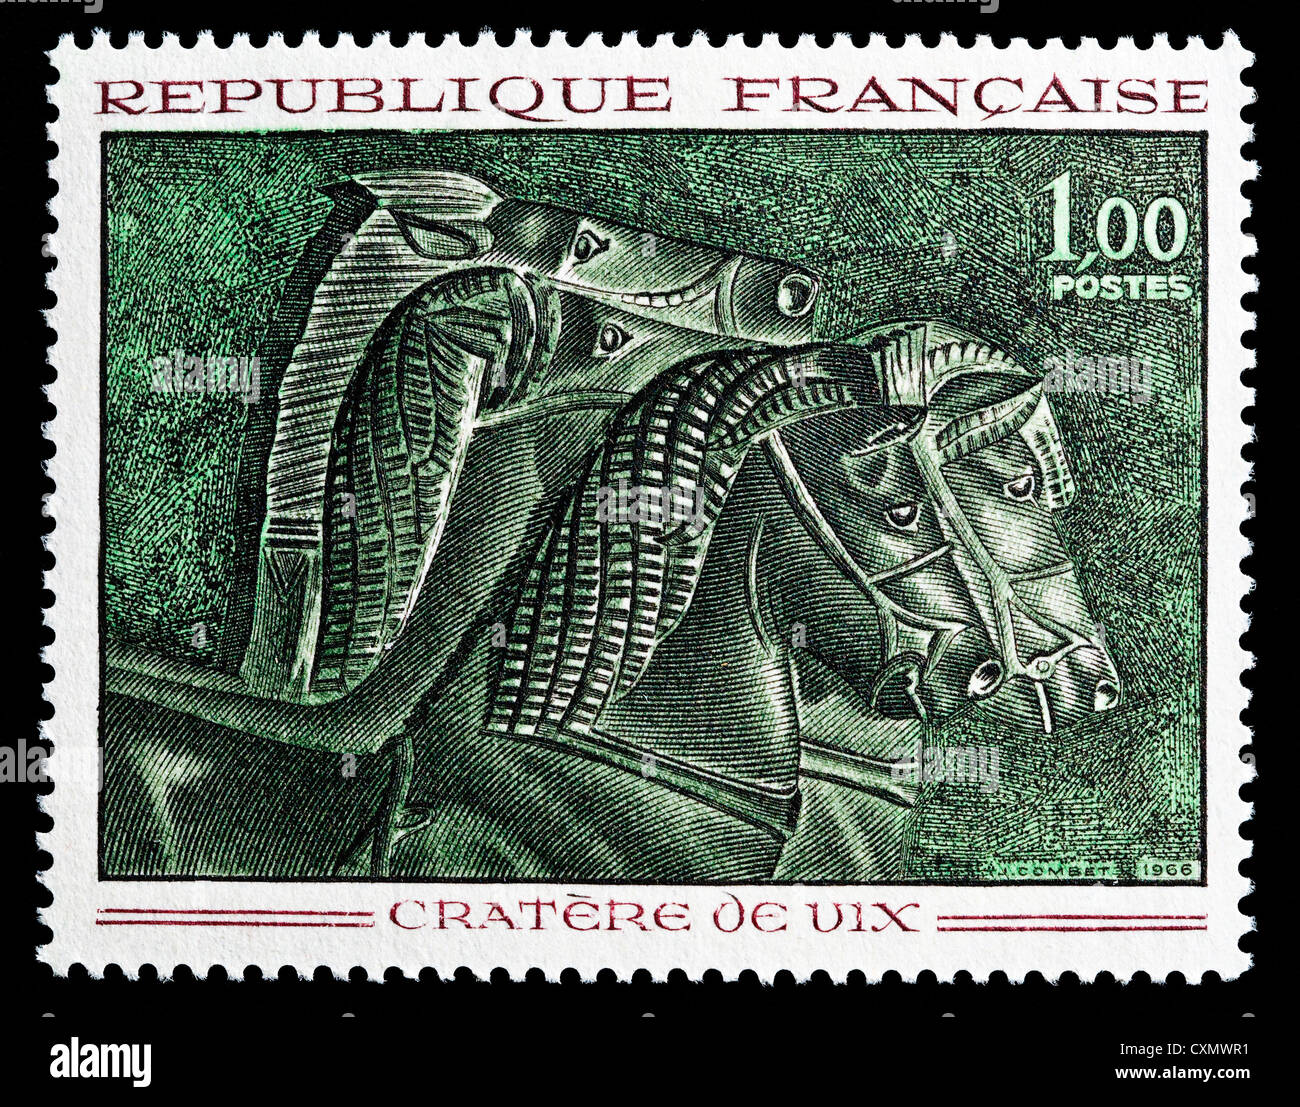 Unused 1966 French postage stamp depicting "Cratere de Vix" 500BC bronze drinking vessel. Stock Photo